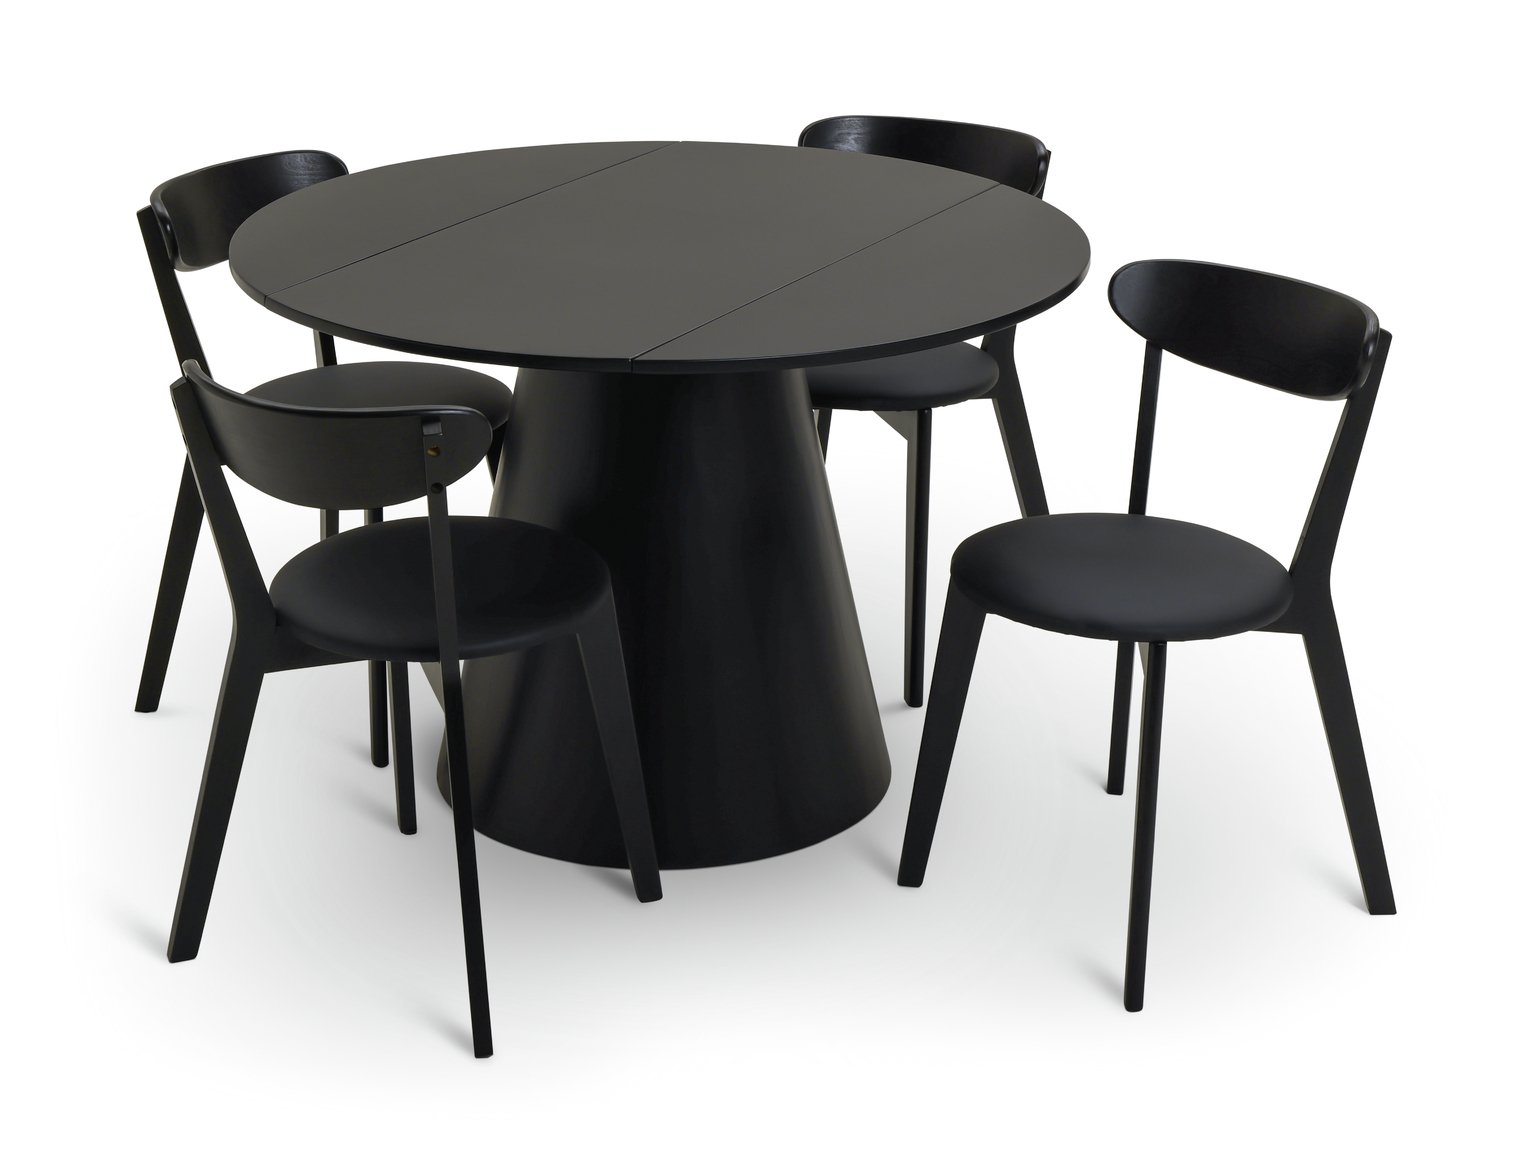 Habitat Iver Dining Table & 4 Sophie Black Chairs